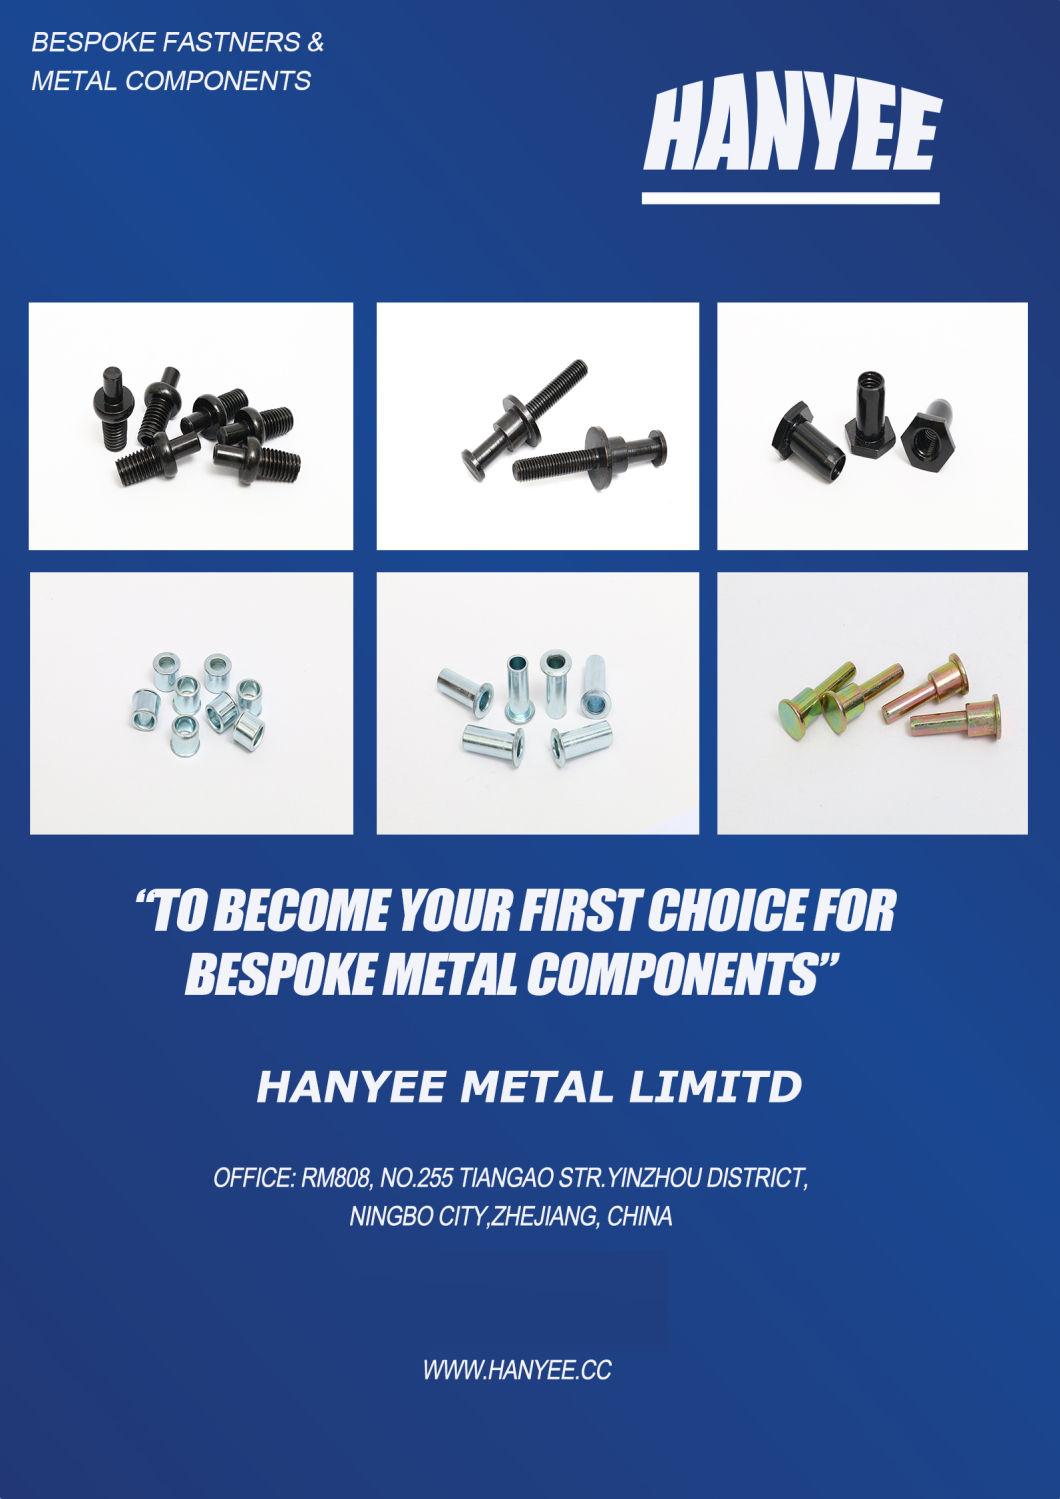 Factory Direct Sale Metal Building Materials Quality Chinese Products Metal Fasteners